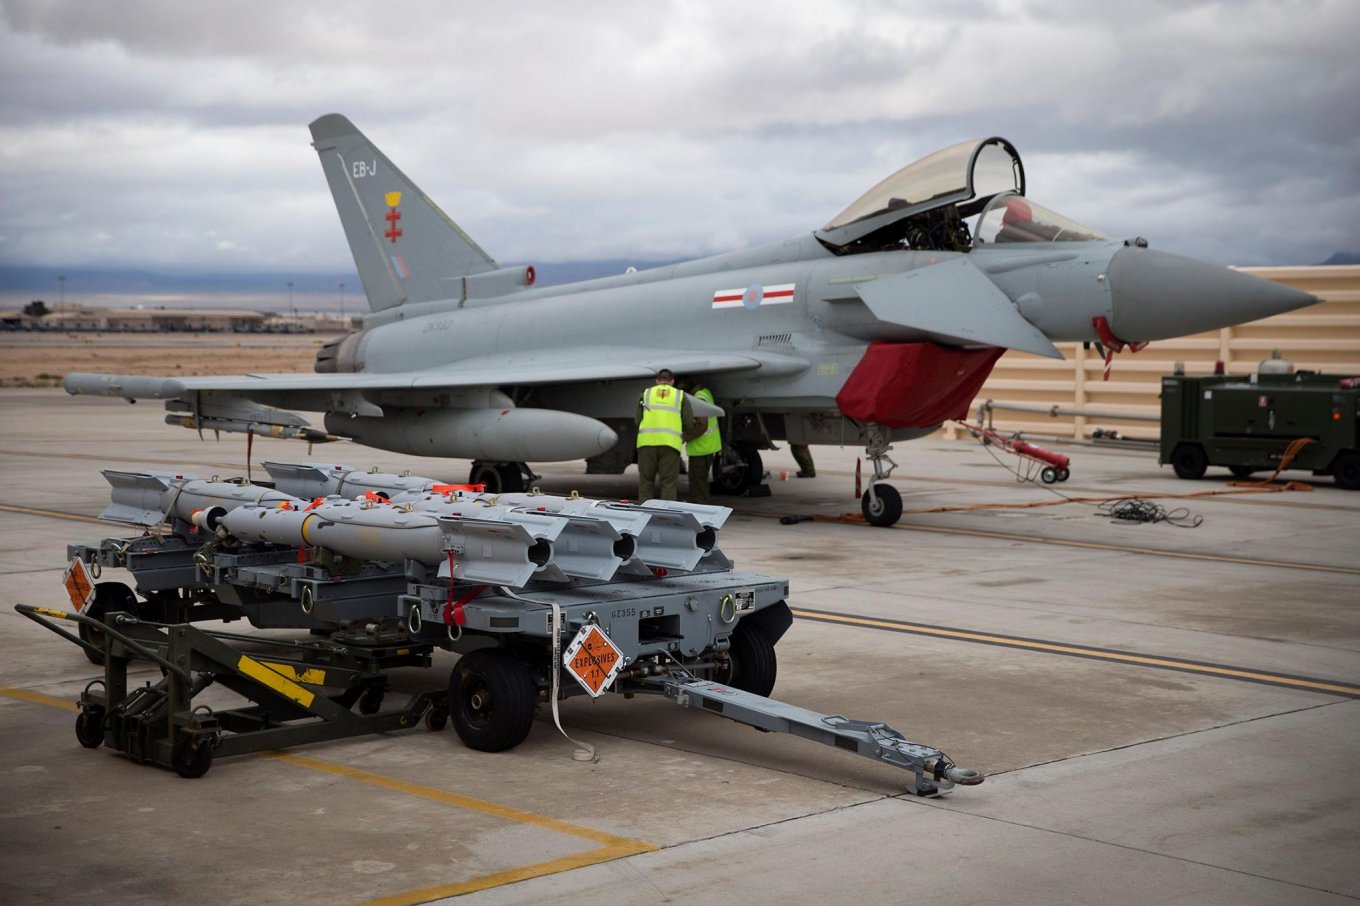 Paveway IV next to a Eurofighter Typhoon / Defense Express / About Paveway IV Bombs Britain is Allegedly Planning to Supply Ukraine